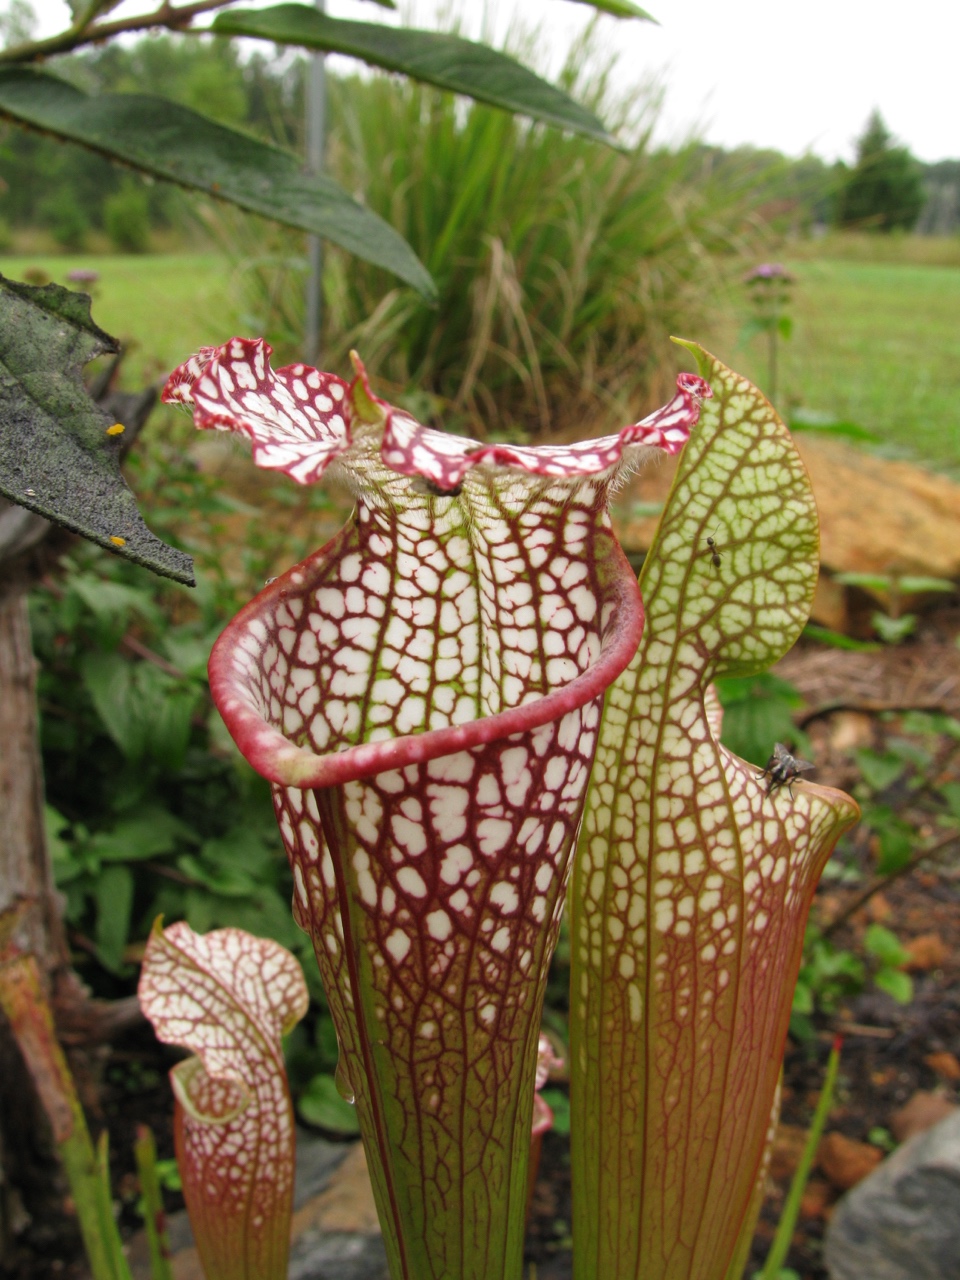 The Scientific Name is Sarracenia leucophylla. You will likely hear them called Whitetop Pitcherplant, Crimson Pitcherplant. This picture shows the Close-up of leaves with upper end and hood being bright white with red veins of Sarracenia leucophylla